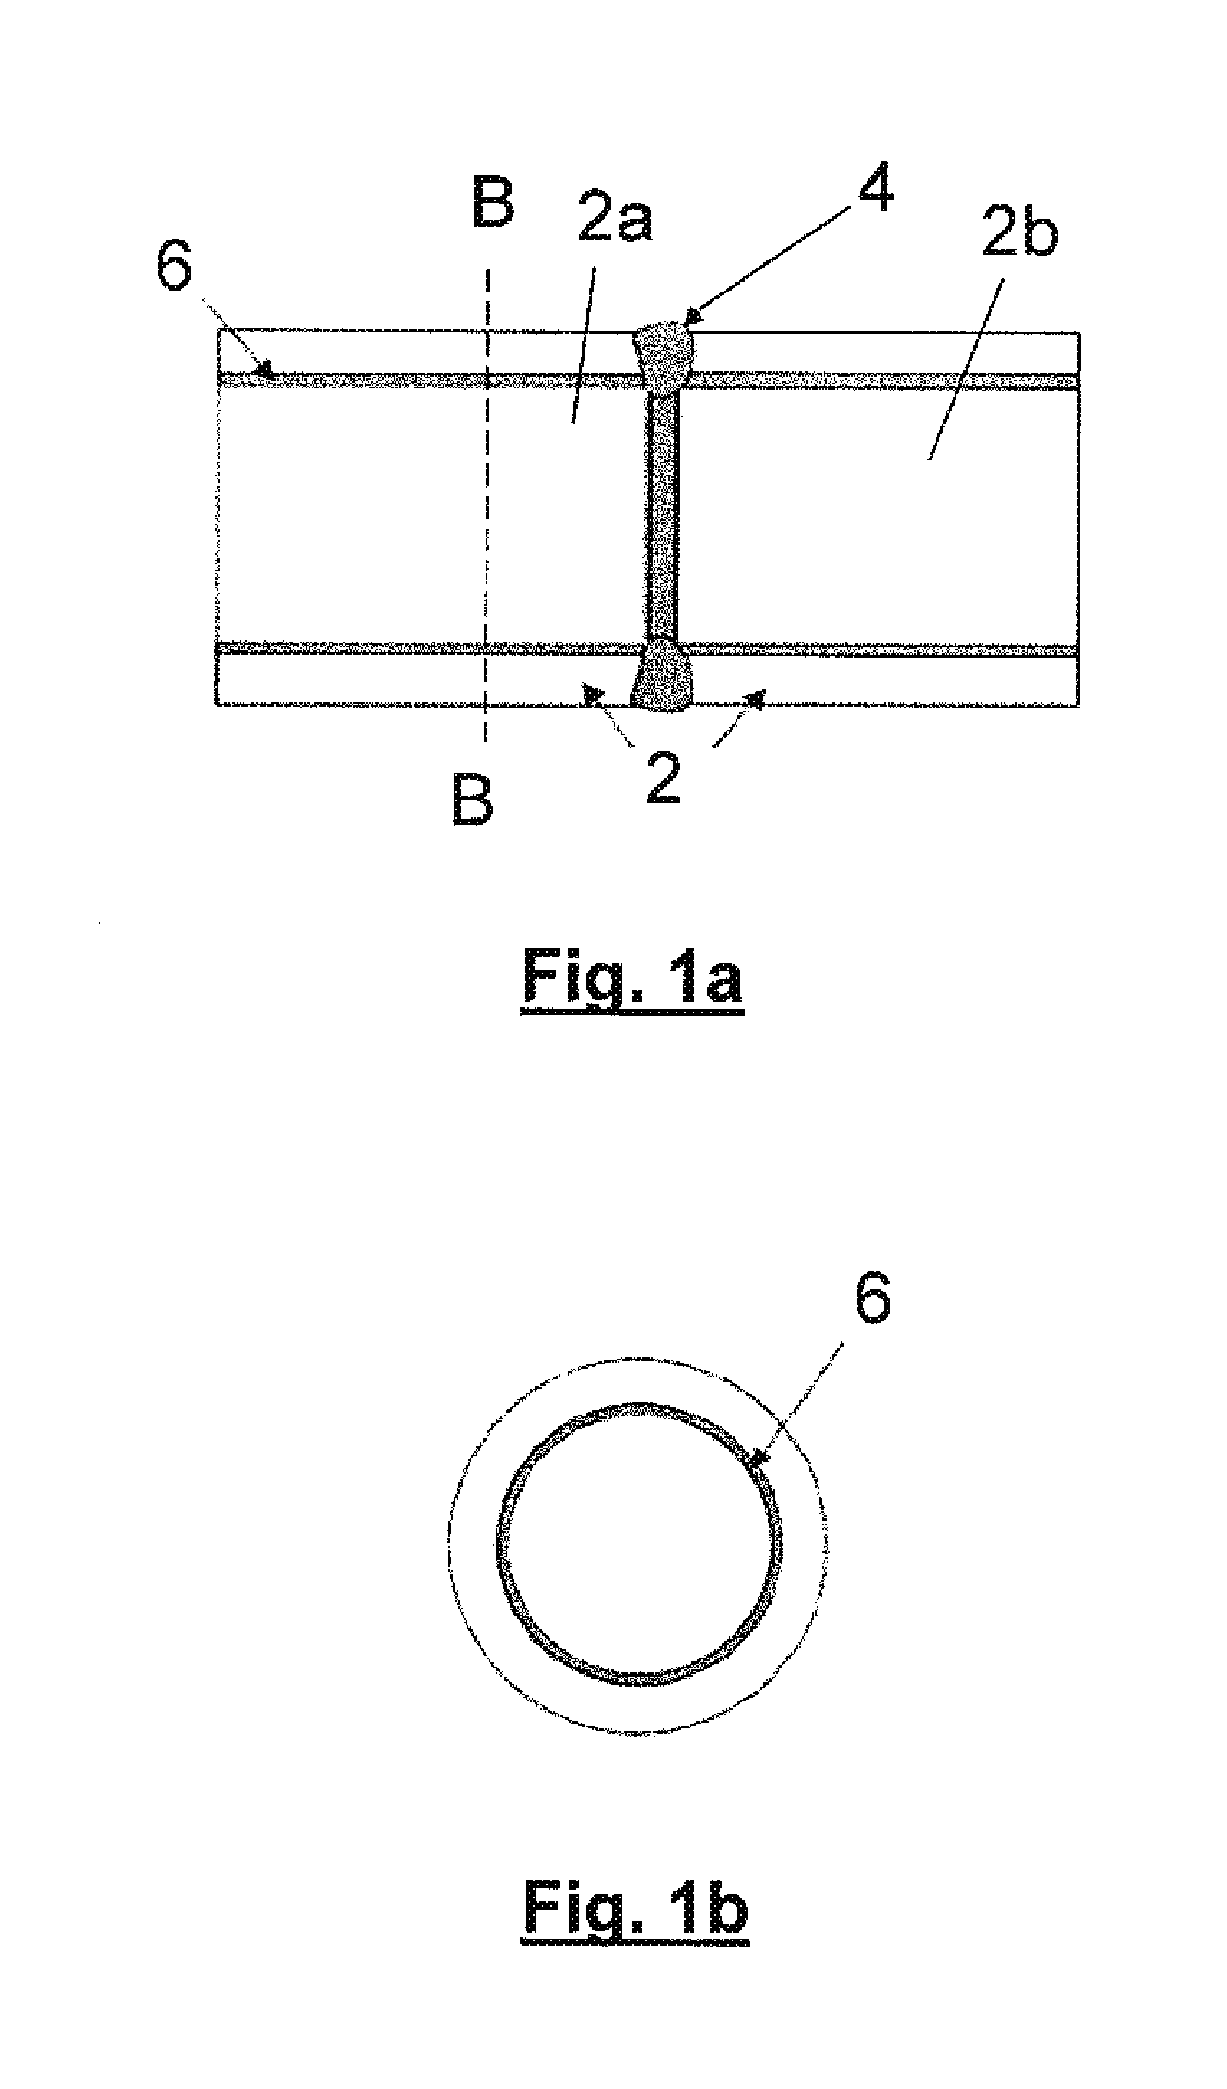 Method of and a welding station for laying a pipeline, with pipe section welded together by internal and external welding